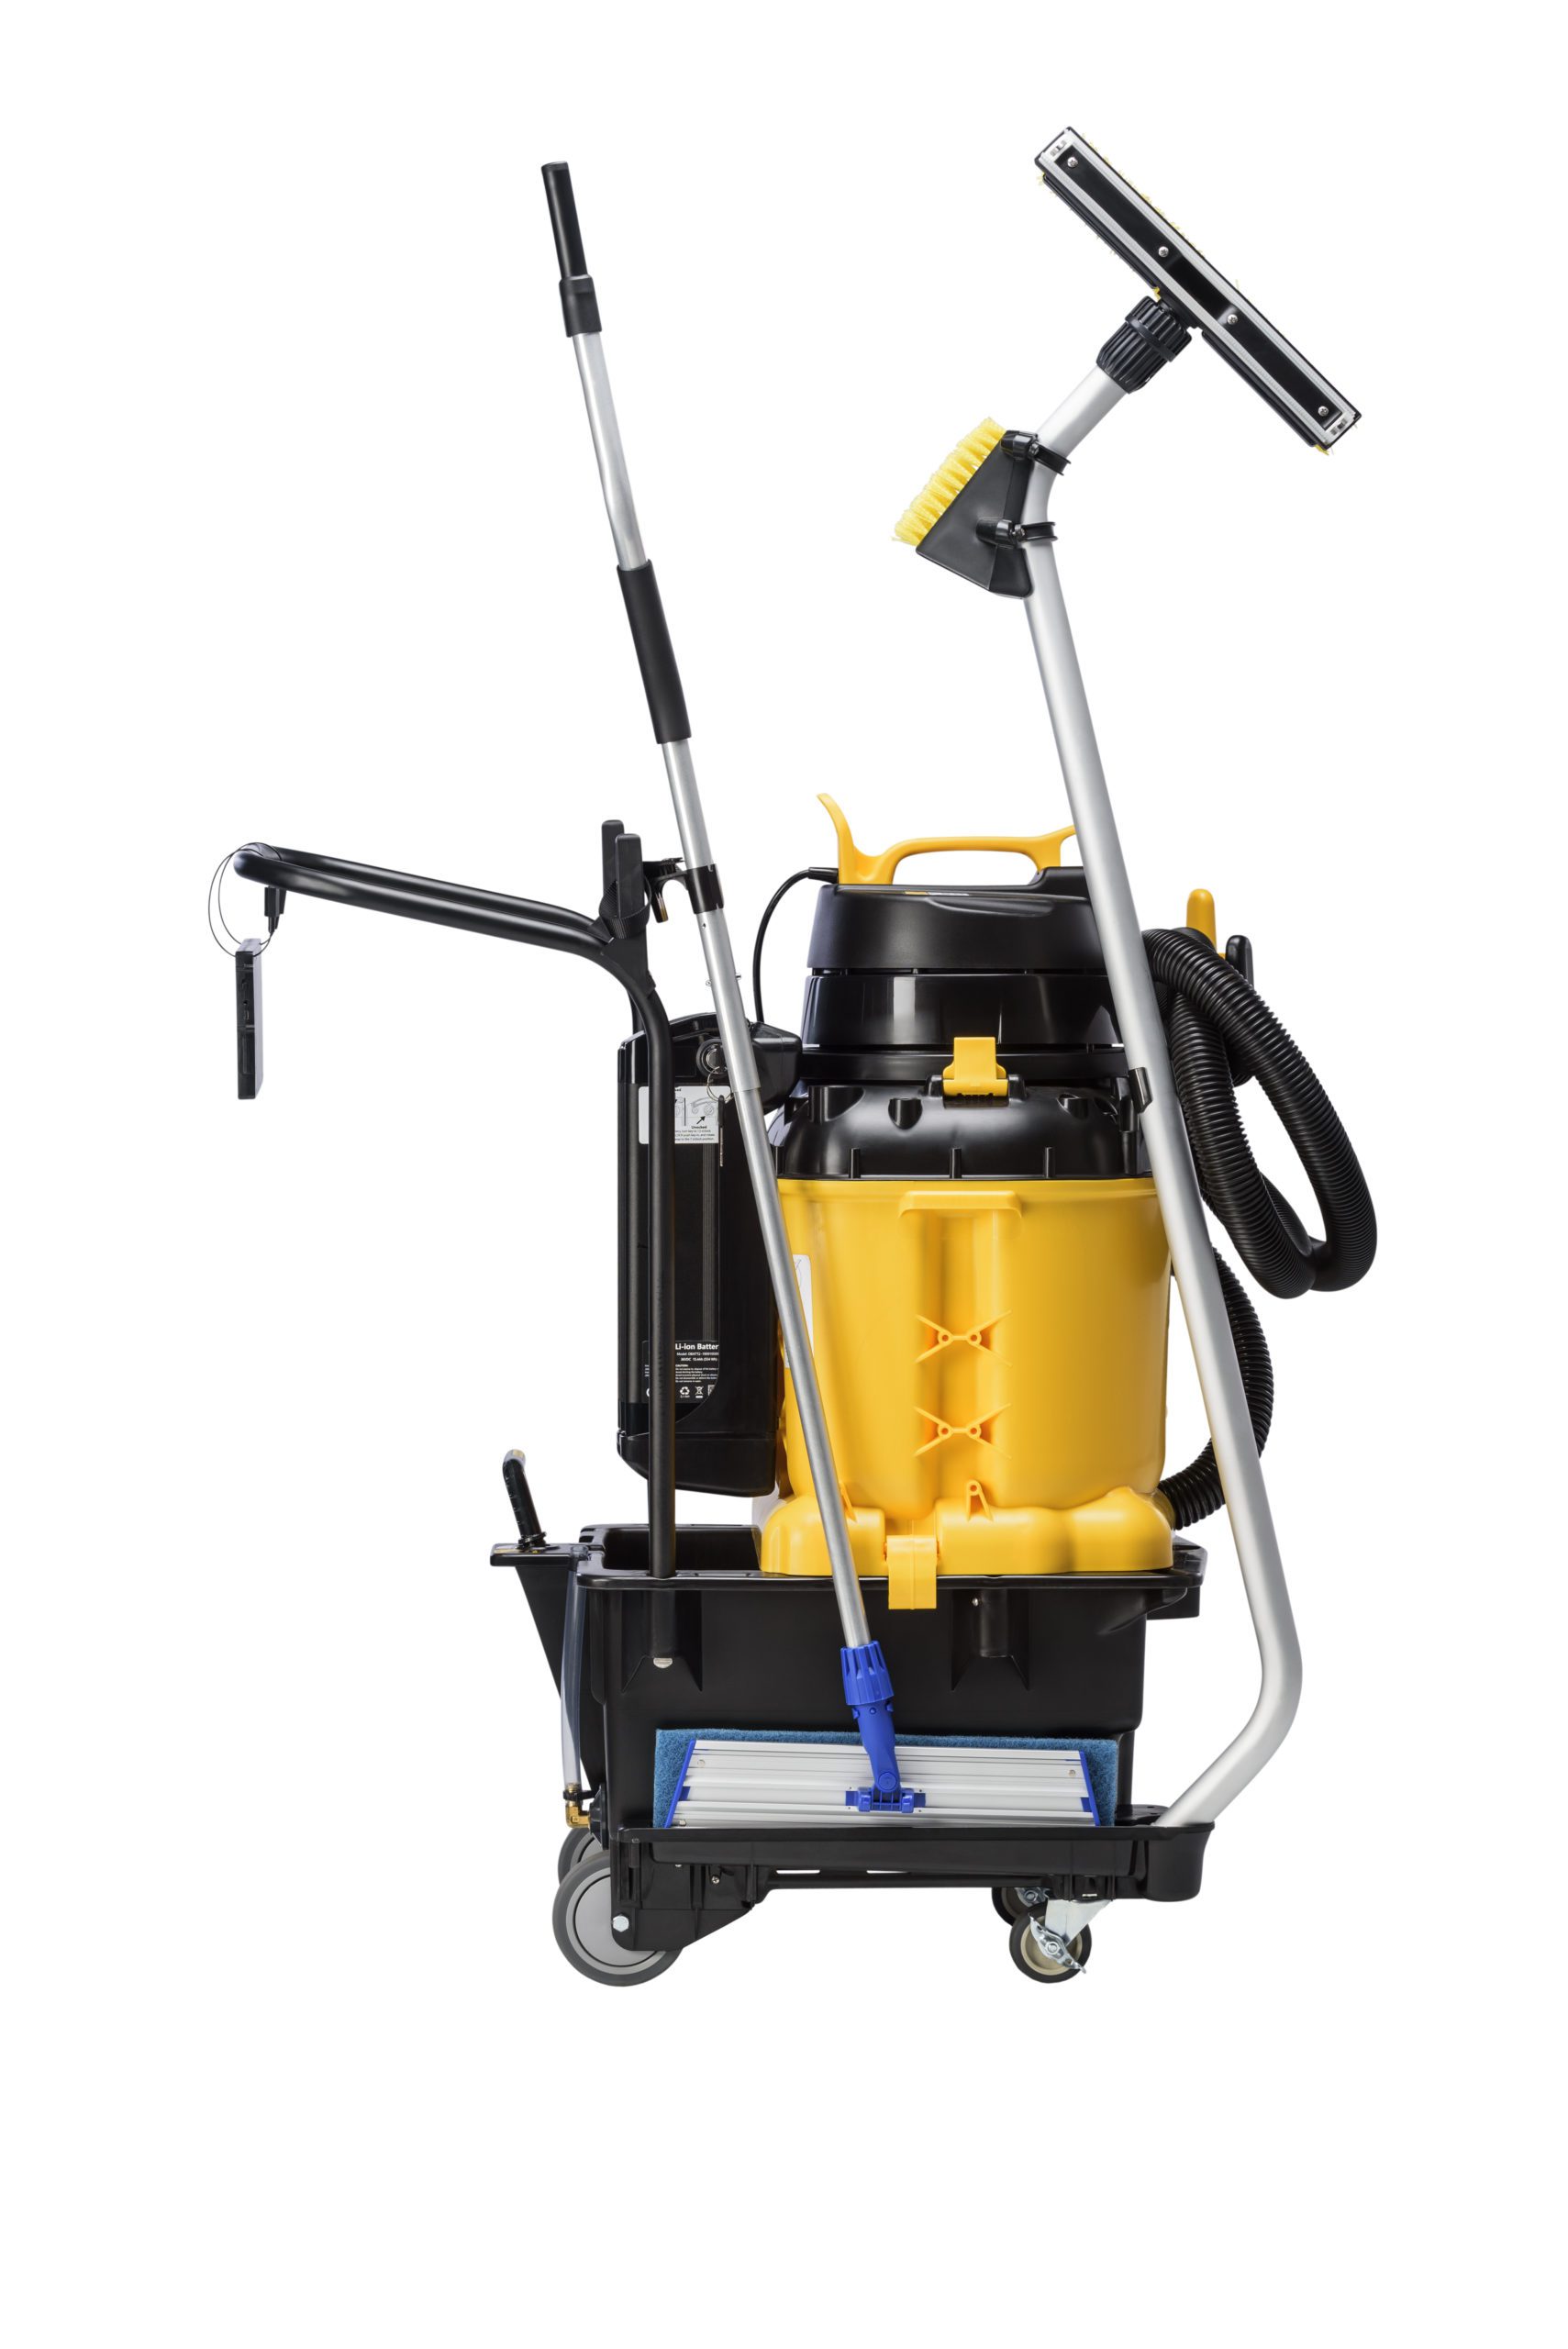 Grout Cleaner Bundle, Electric Stand Up Tile Grout Cleaner Machine